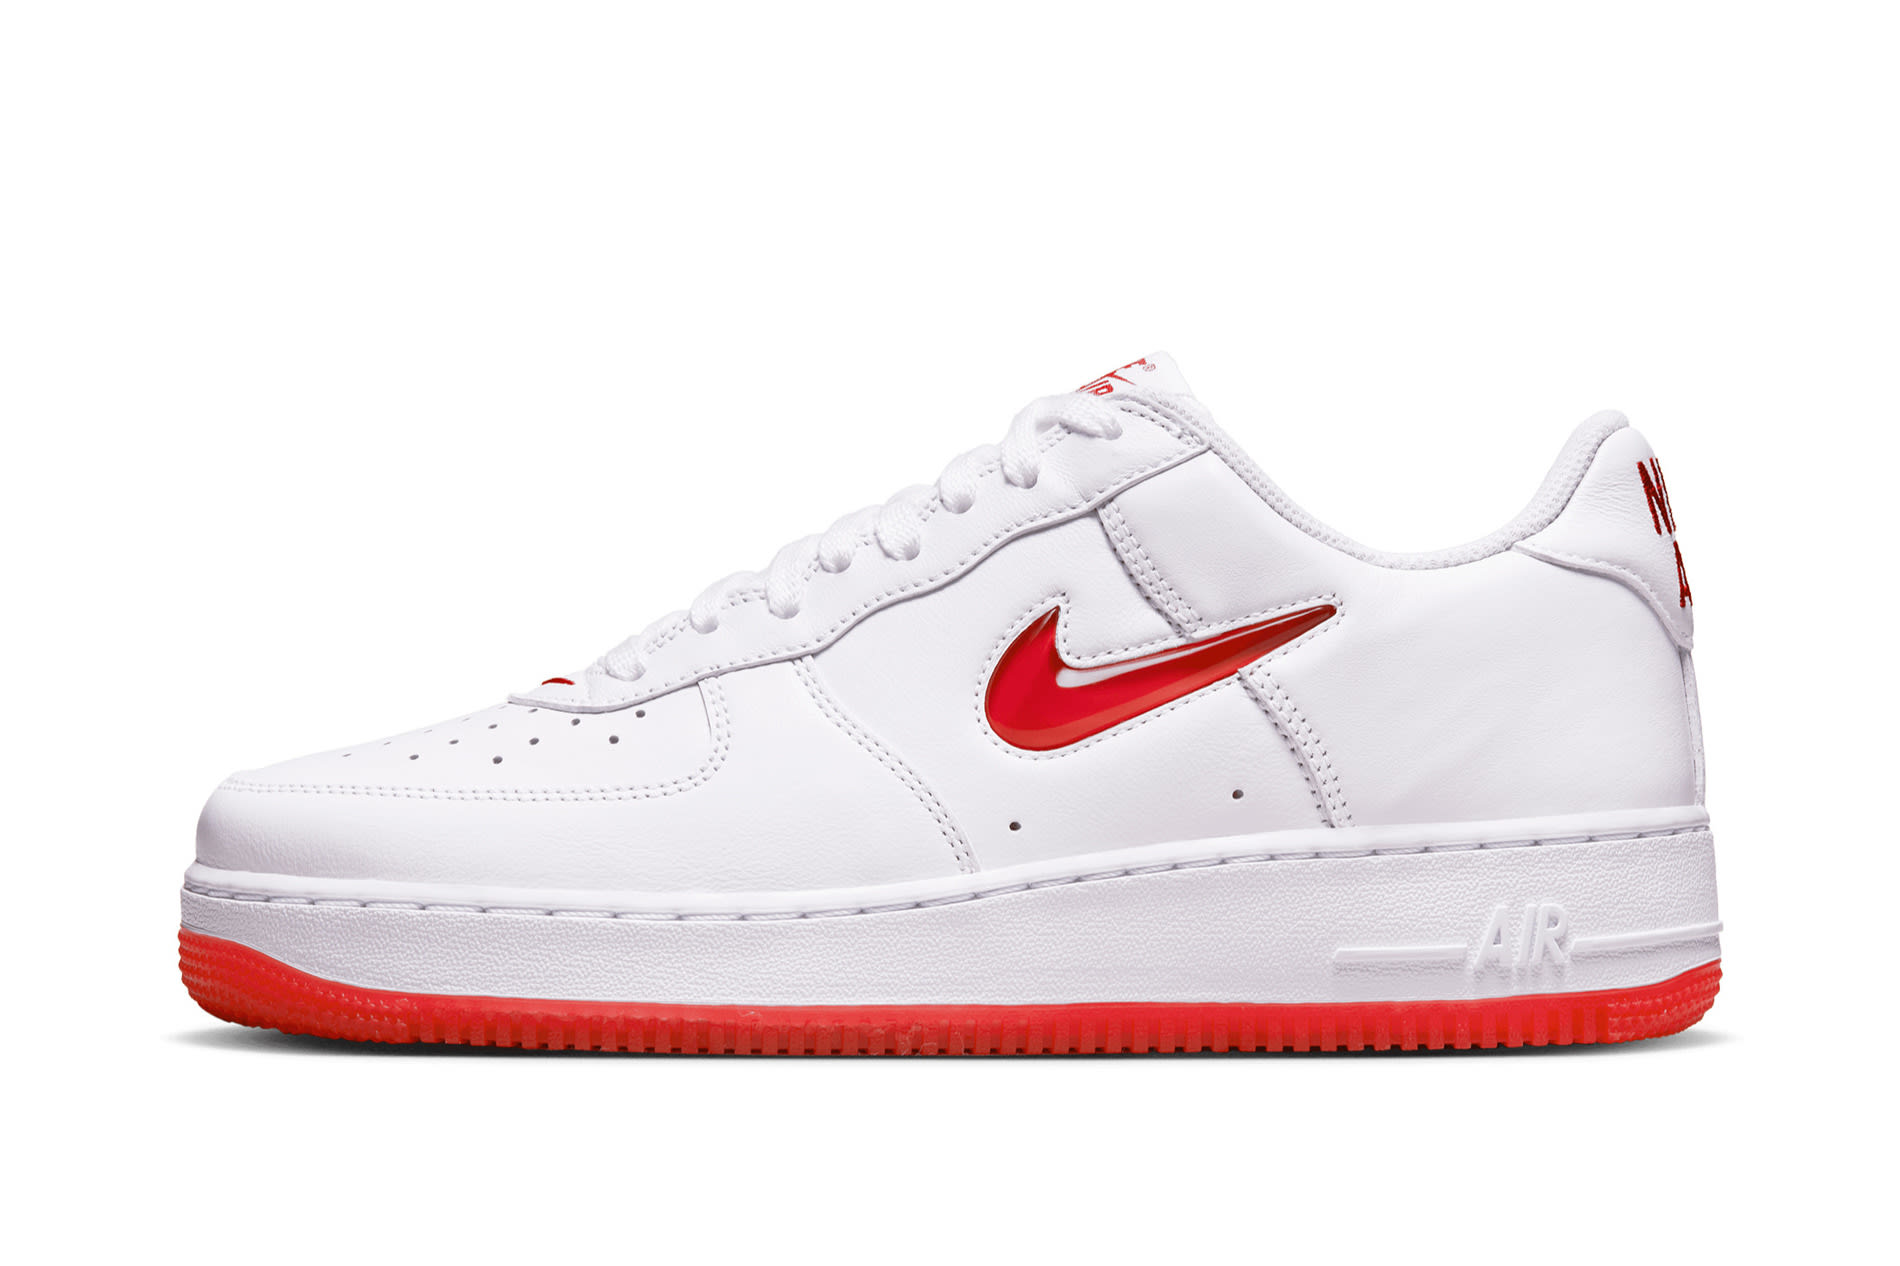 Nike Air Force 1 07 LV8 'First Use University Red' – GHAN Shoe